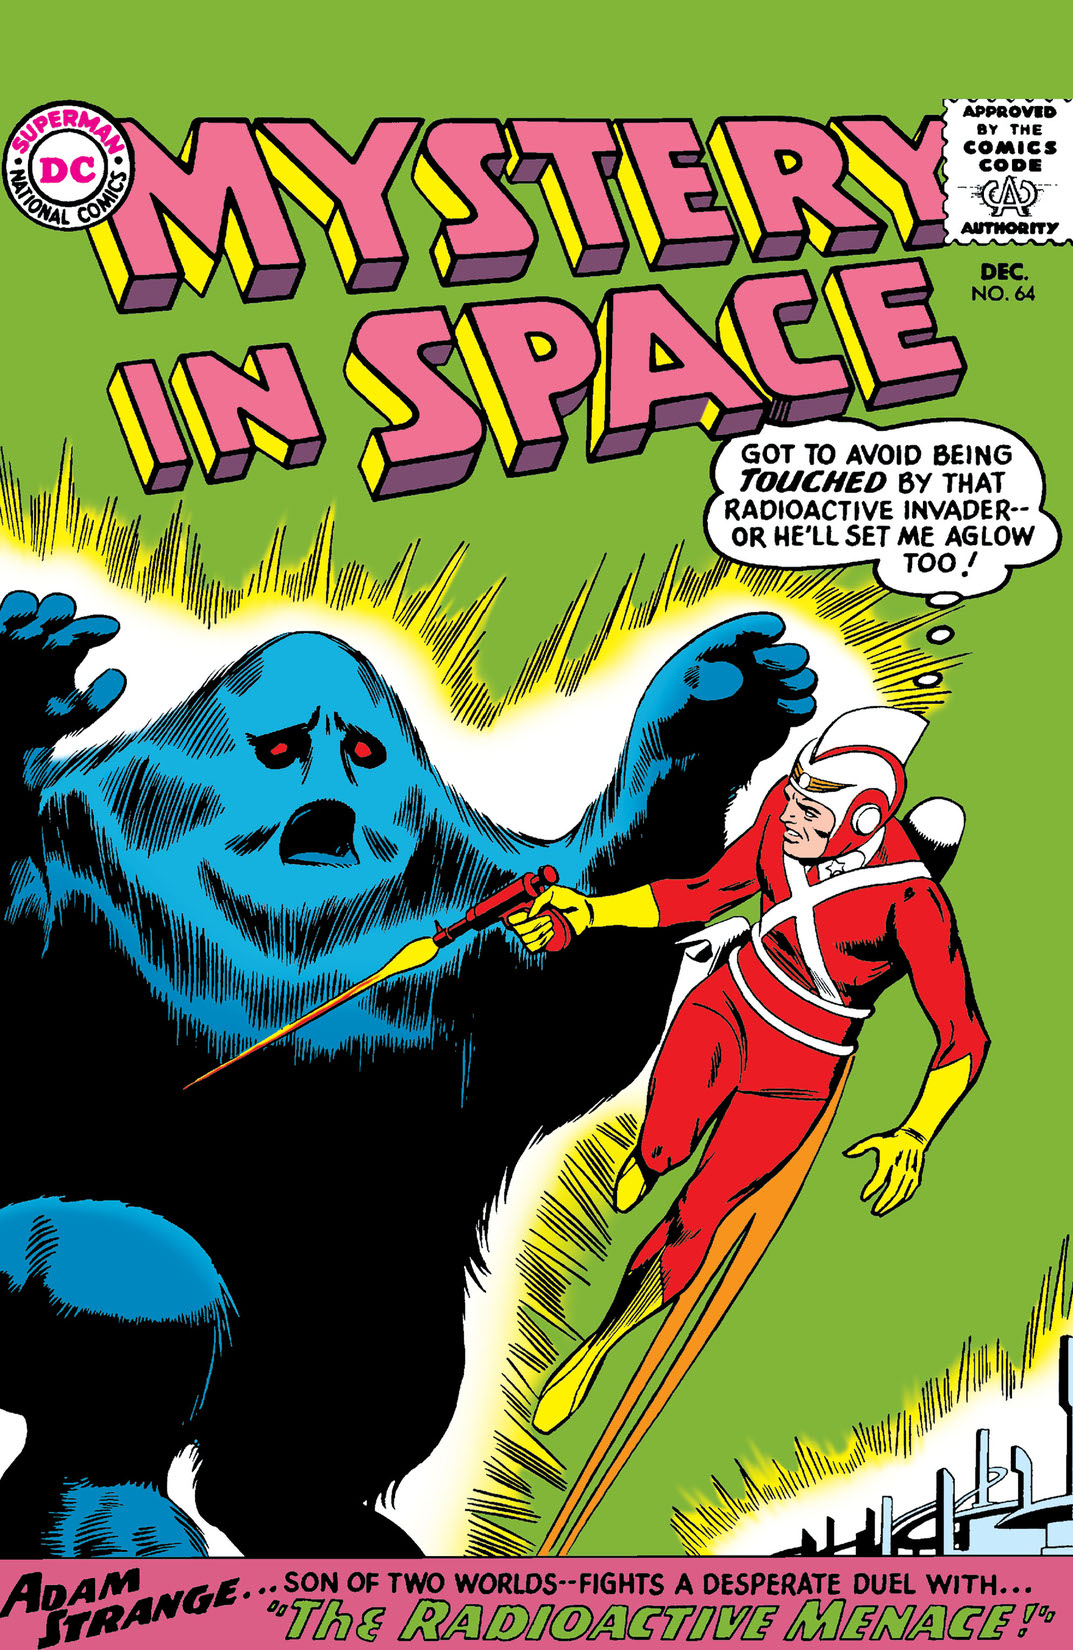 Mystery in Space (1951-) #64 preview images